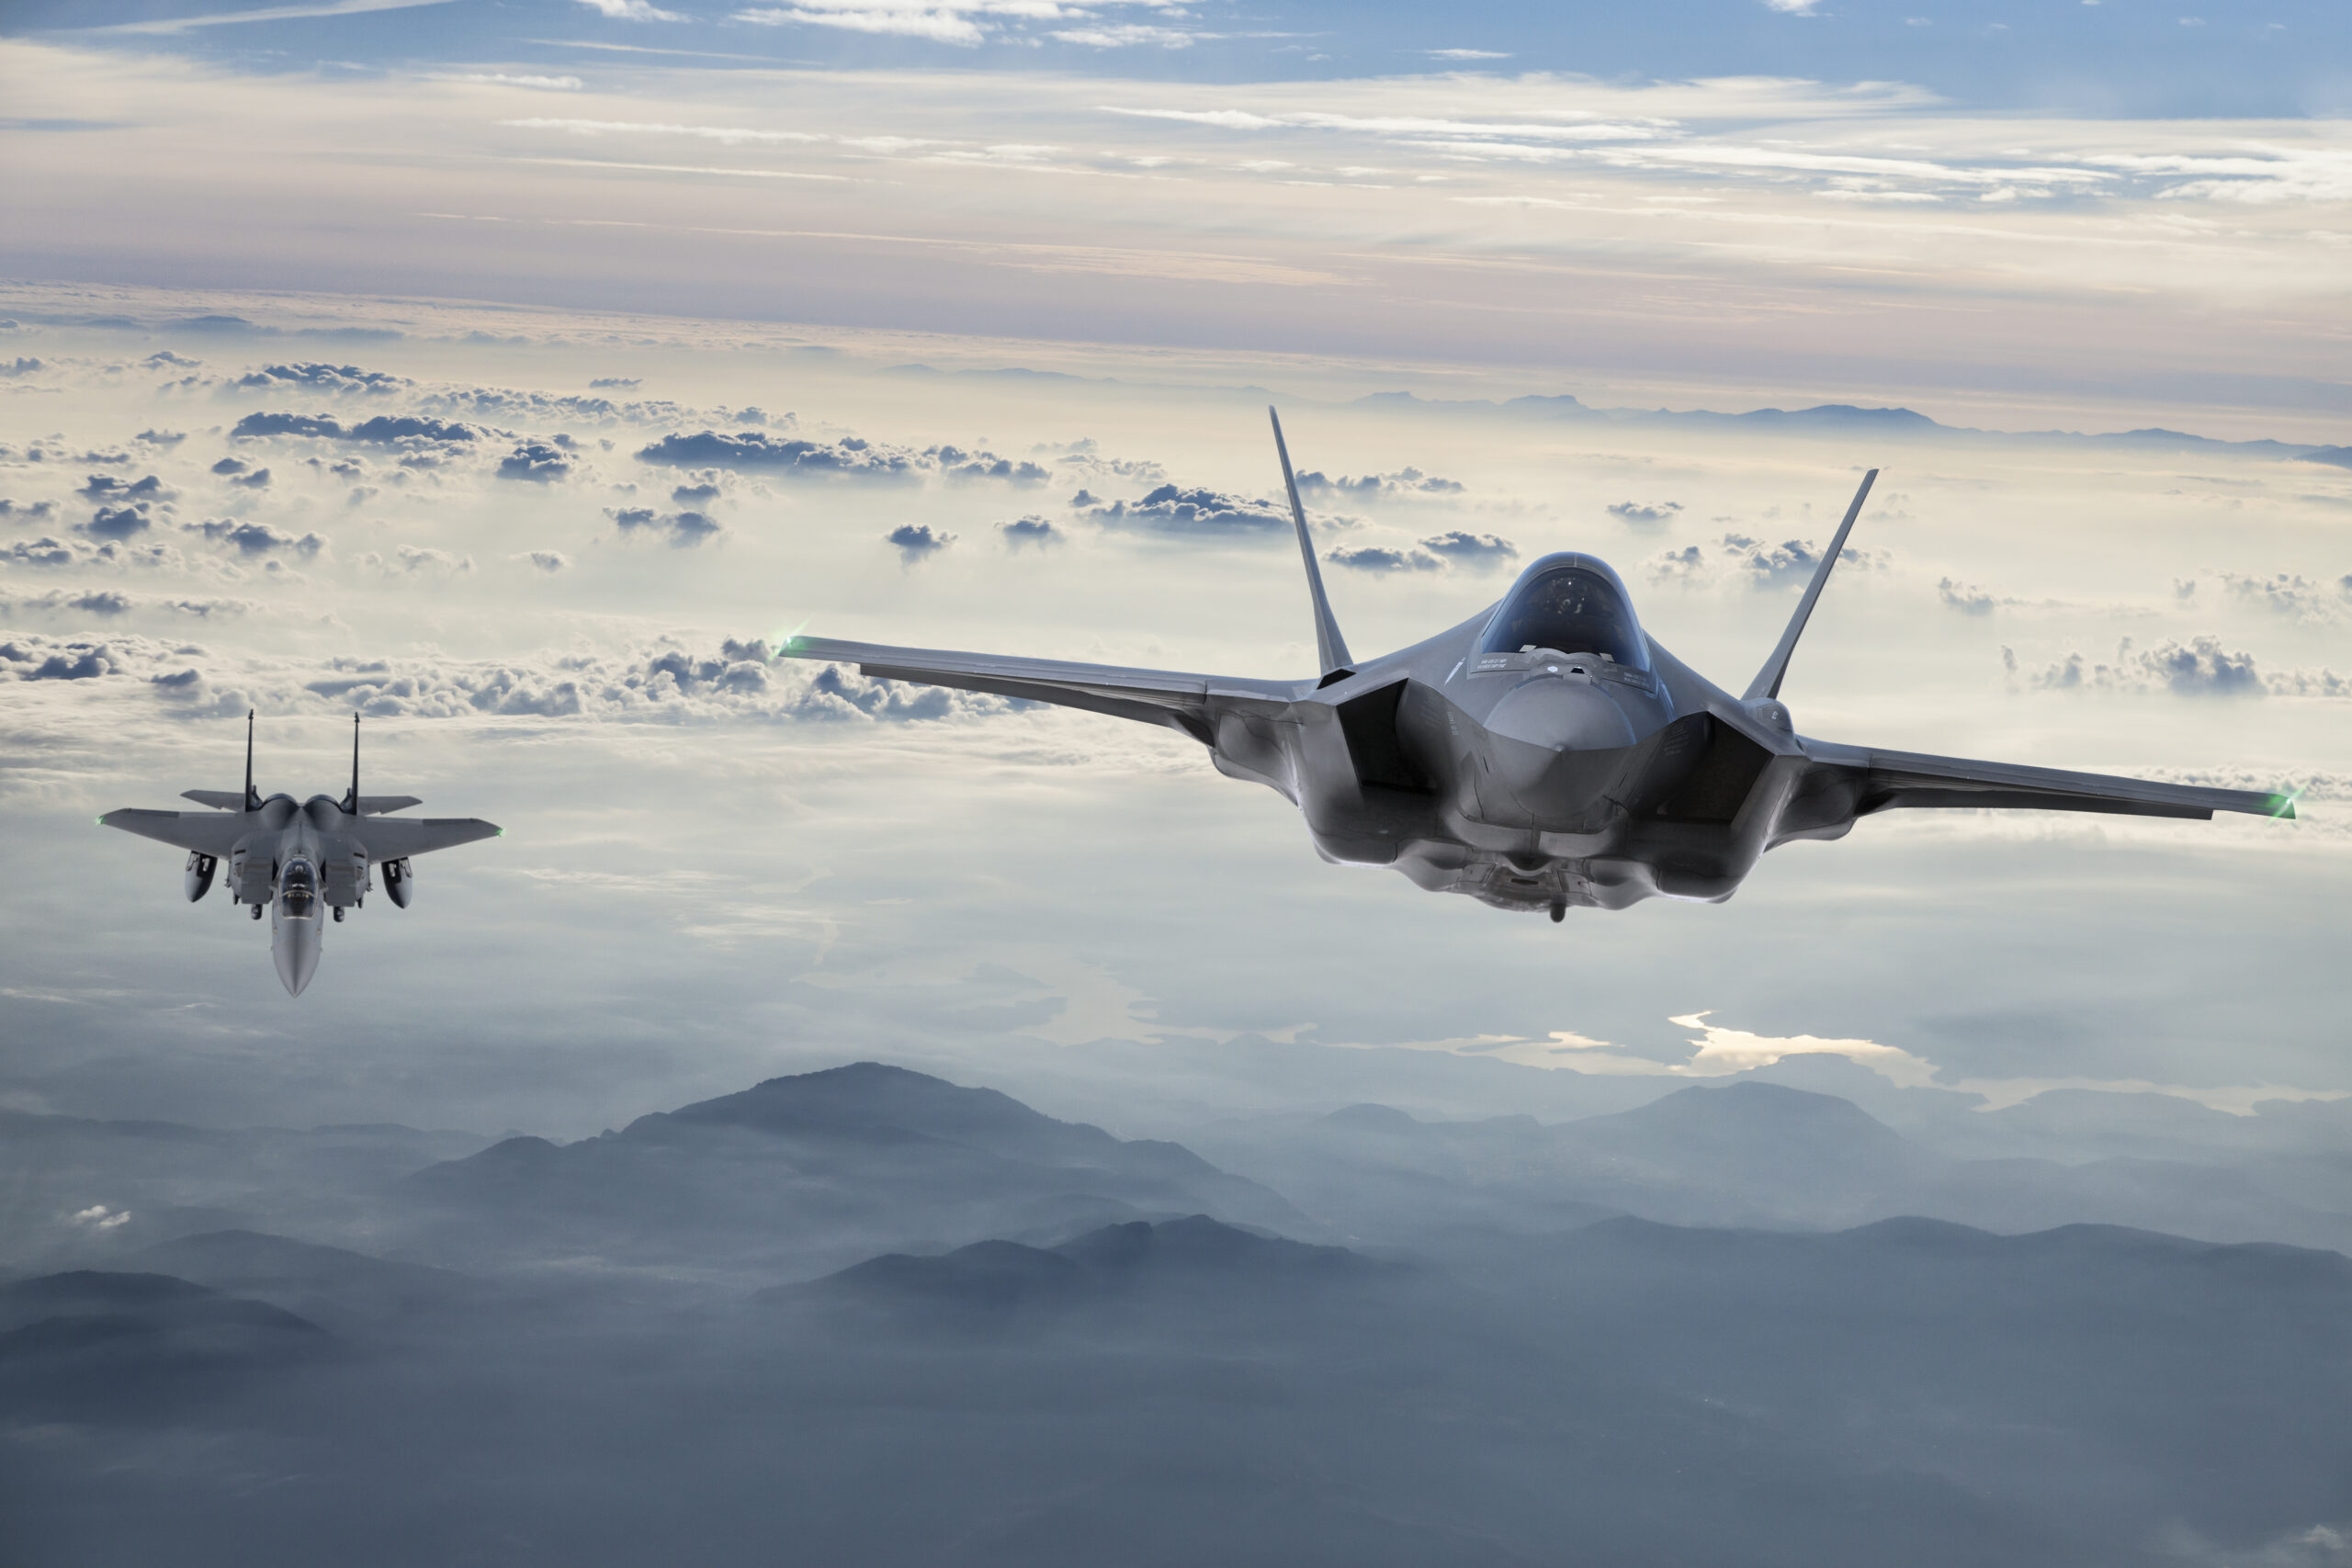 Two fighter jets flying above a mountainous landscape.